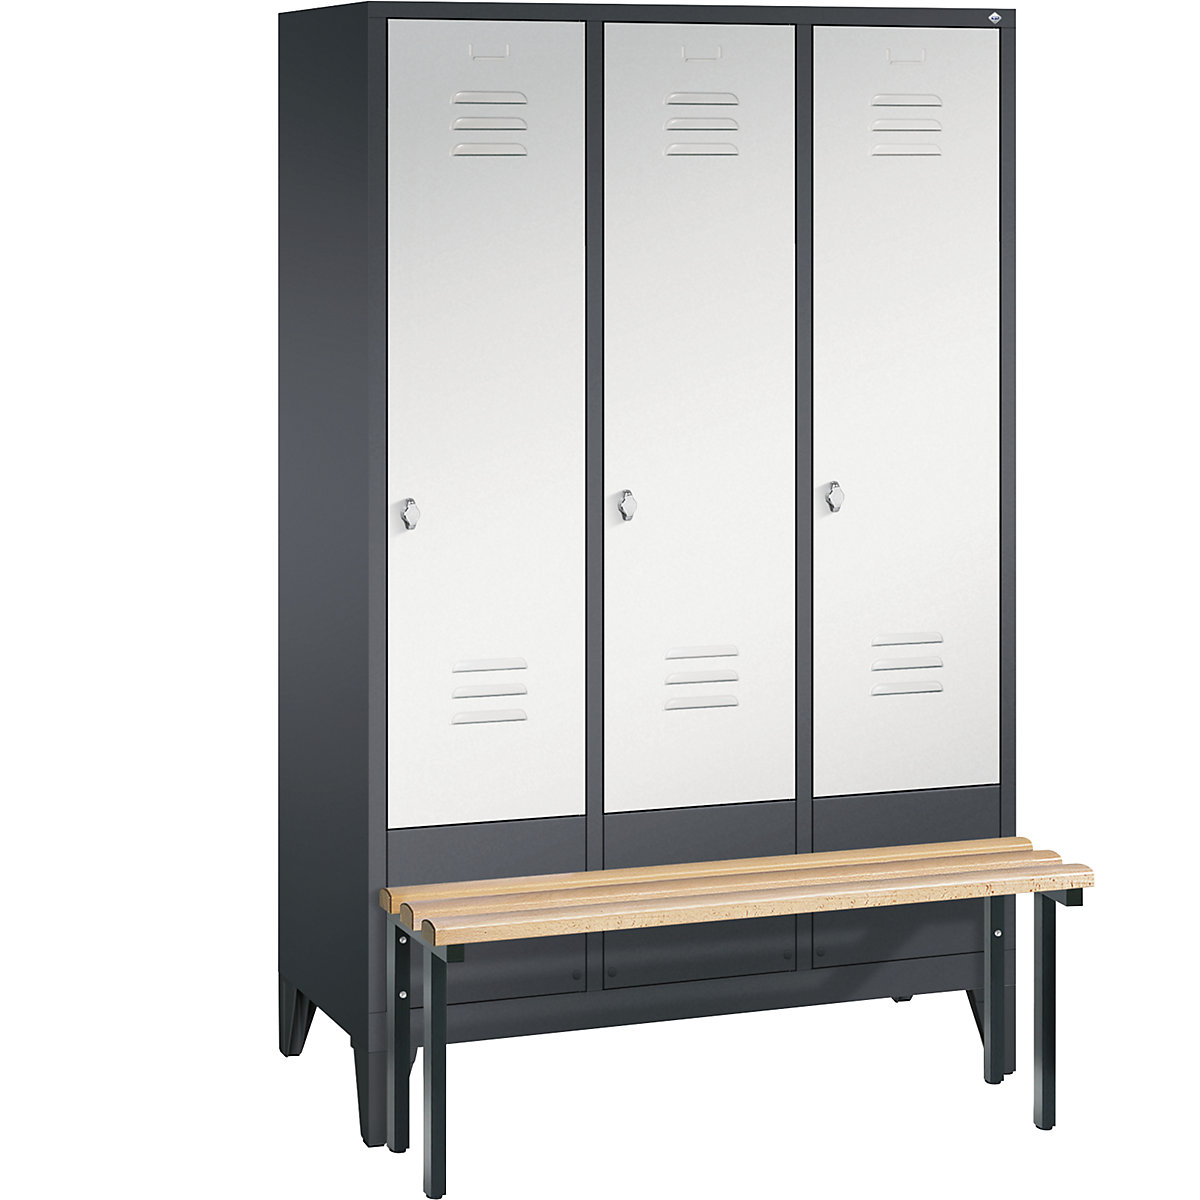 CLASSIC cloakroom locker with bench mounted in front – C+P, 3 compartments, compartment width 400 mm, black grey / light grey-14